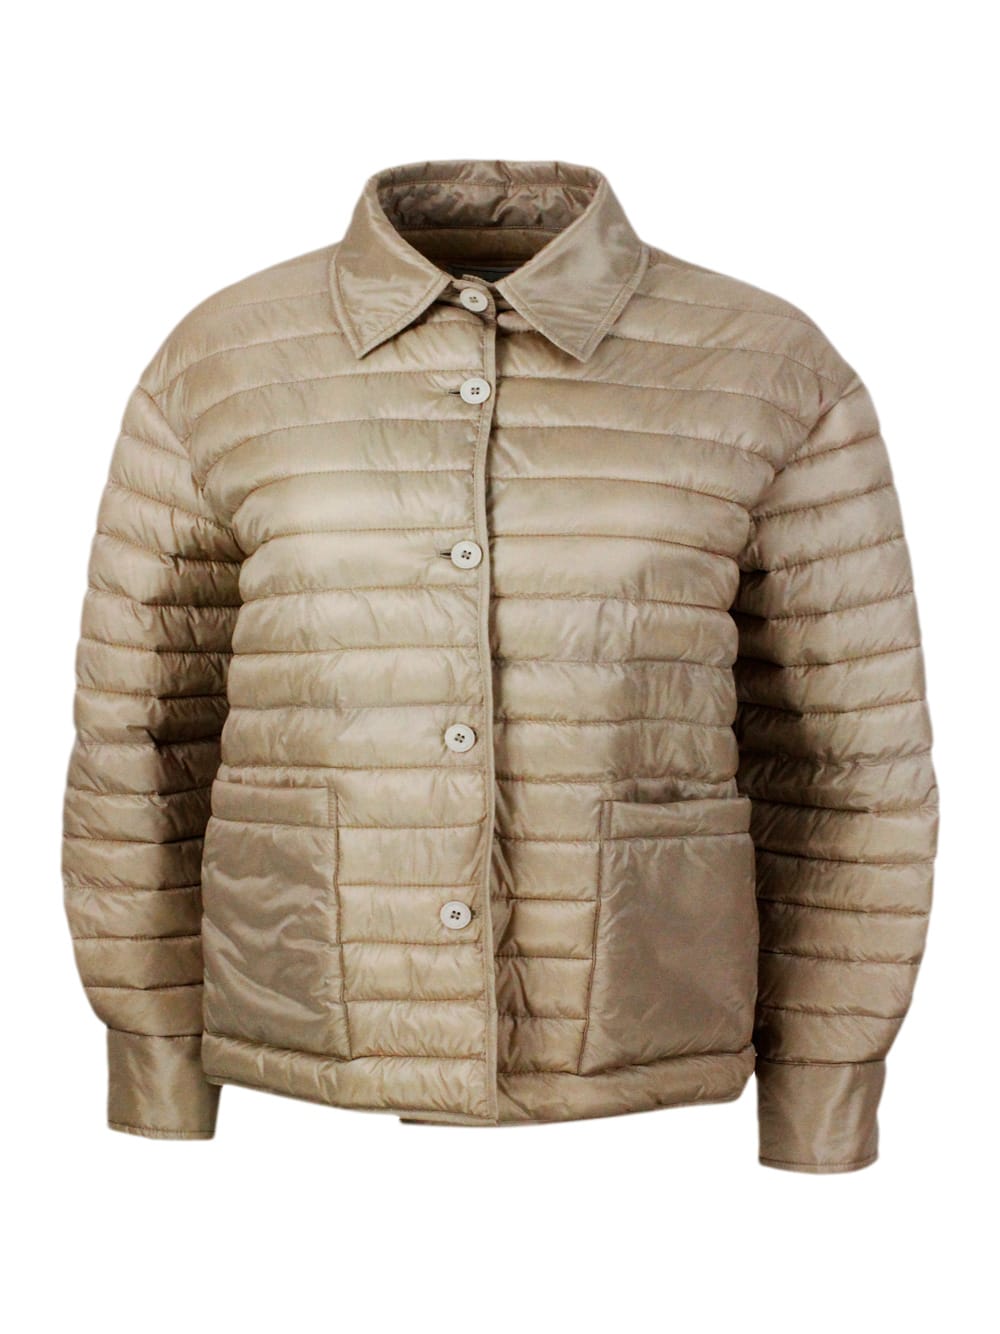 Lightweight 100g Padded Jacket With Shirt Collar, Button Closure And Patch Pockets